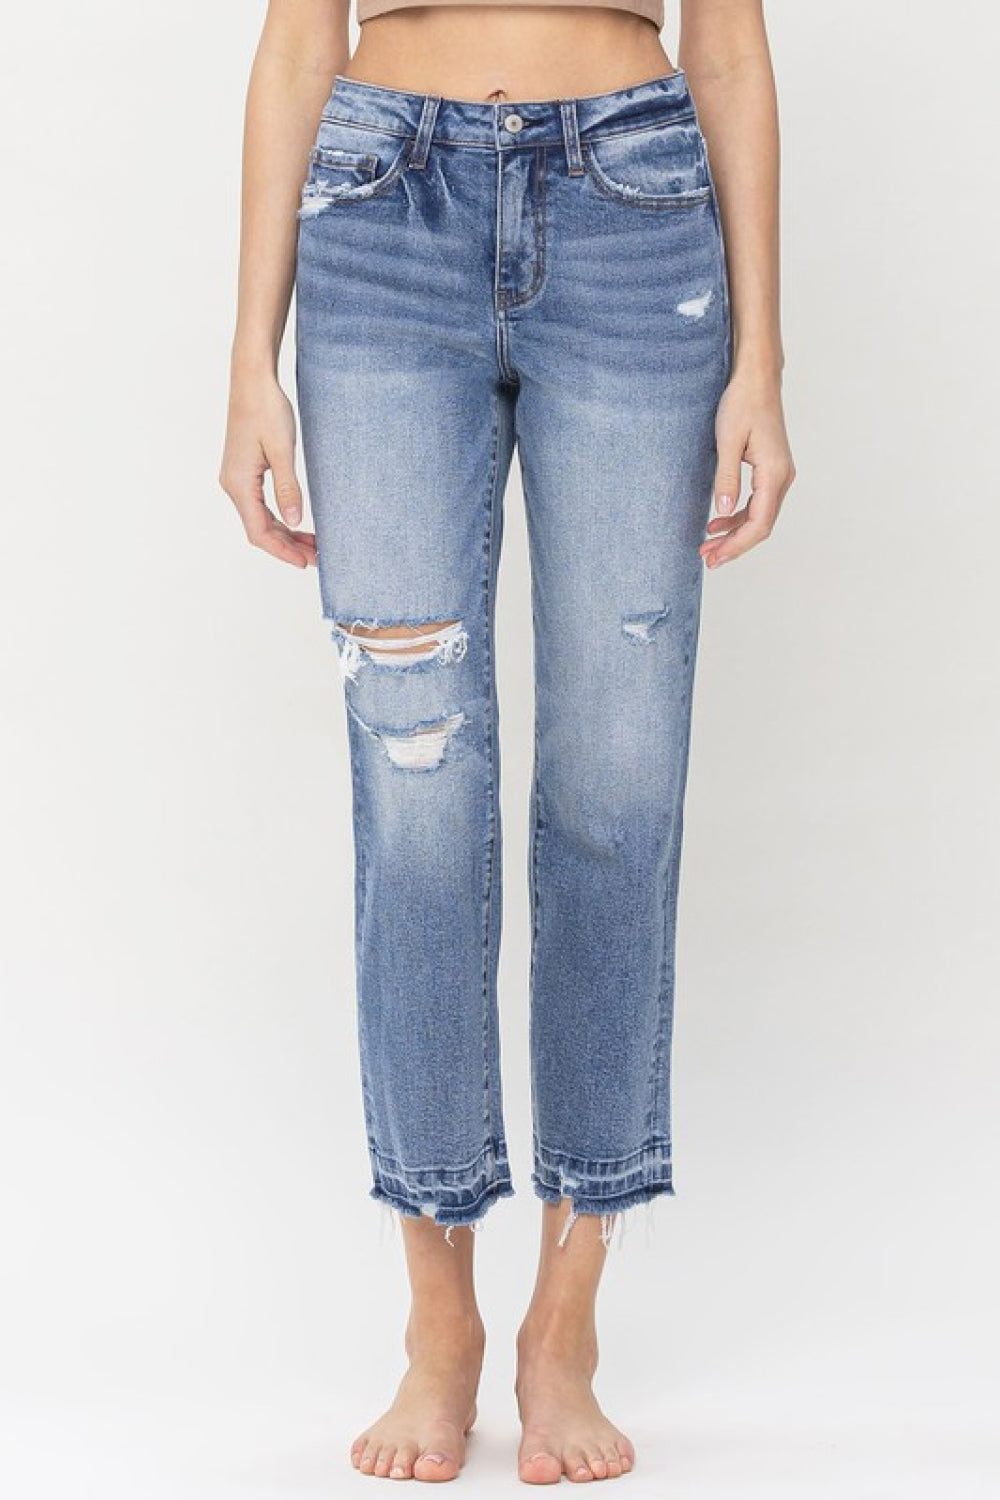 MEDIUM - Lovervet Full Size Lena High Rise Crop Straight Jeans - Ships from The US - womens jeans at TFC&H Co.